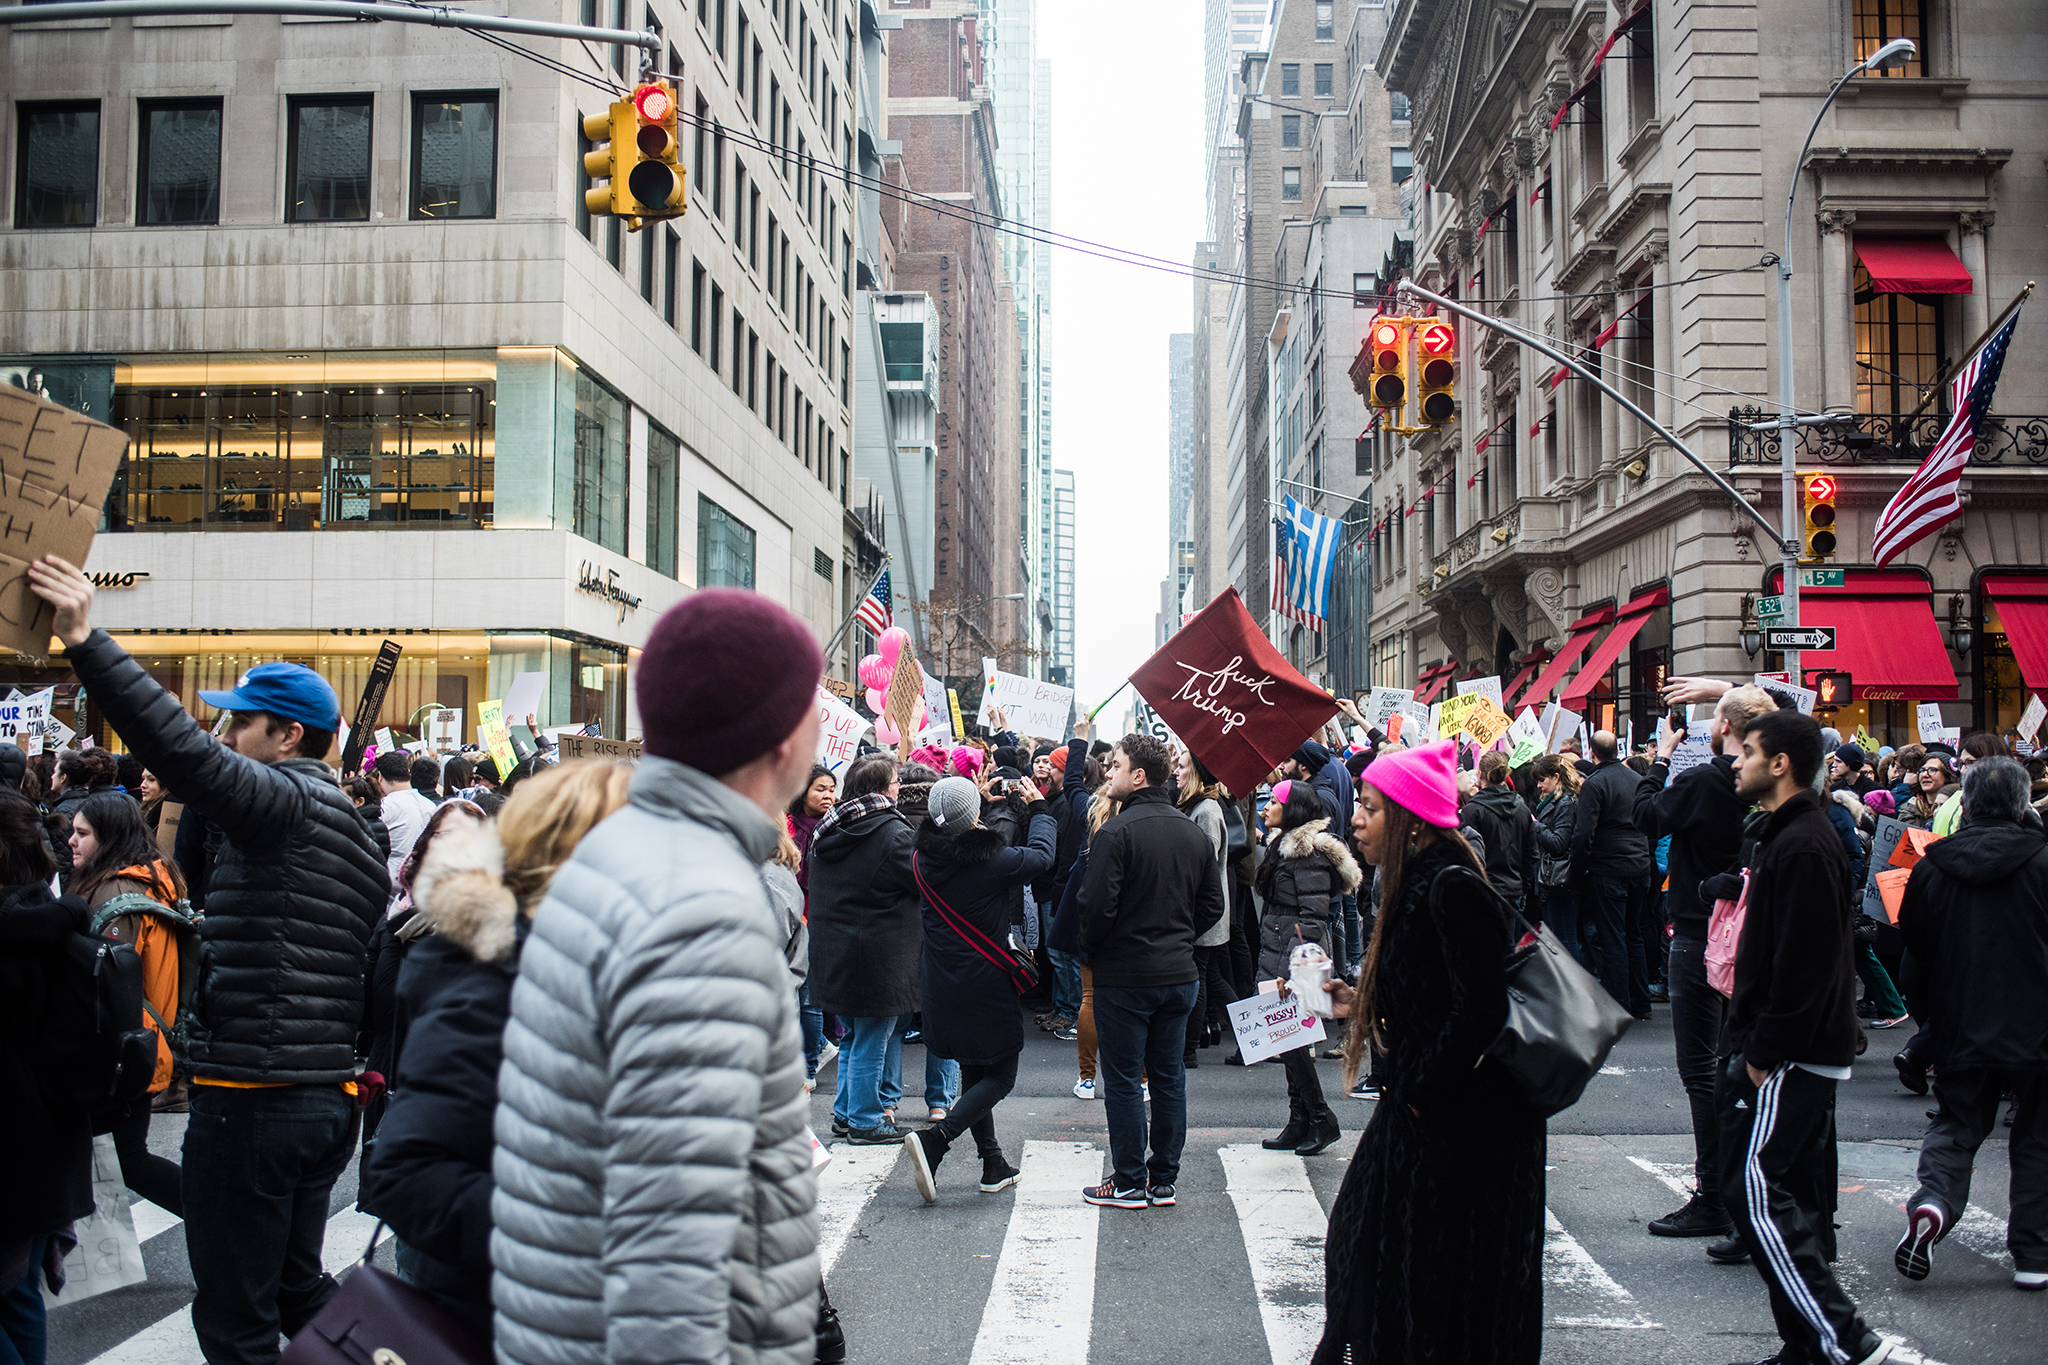 Best photos from the Women's March in NYC 2017 including signs